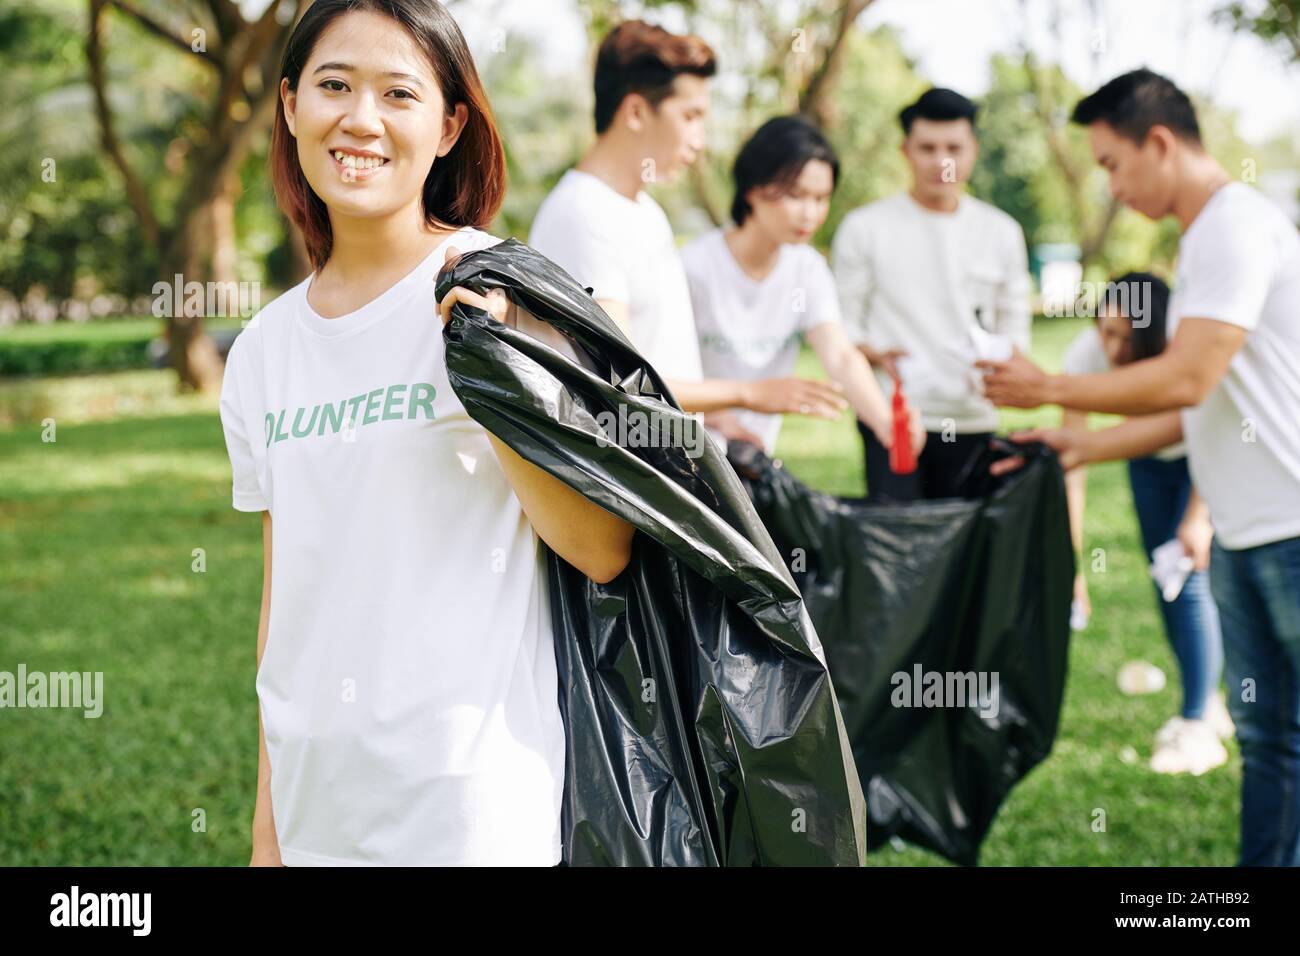 Portrait of young happy volunteer with big plastic trash bag for collecting garbage in park Stock Photo